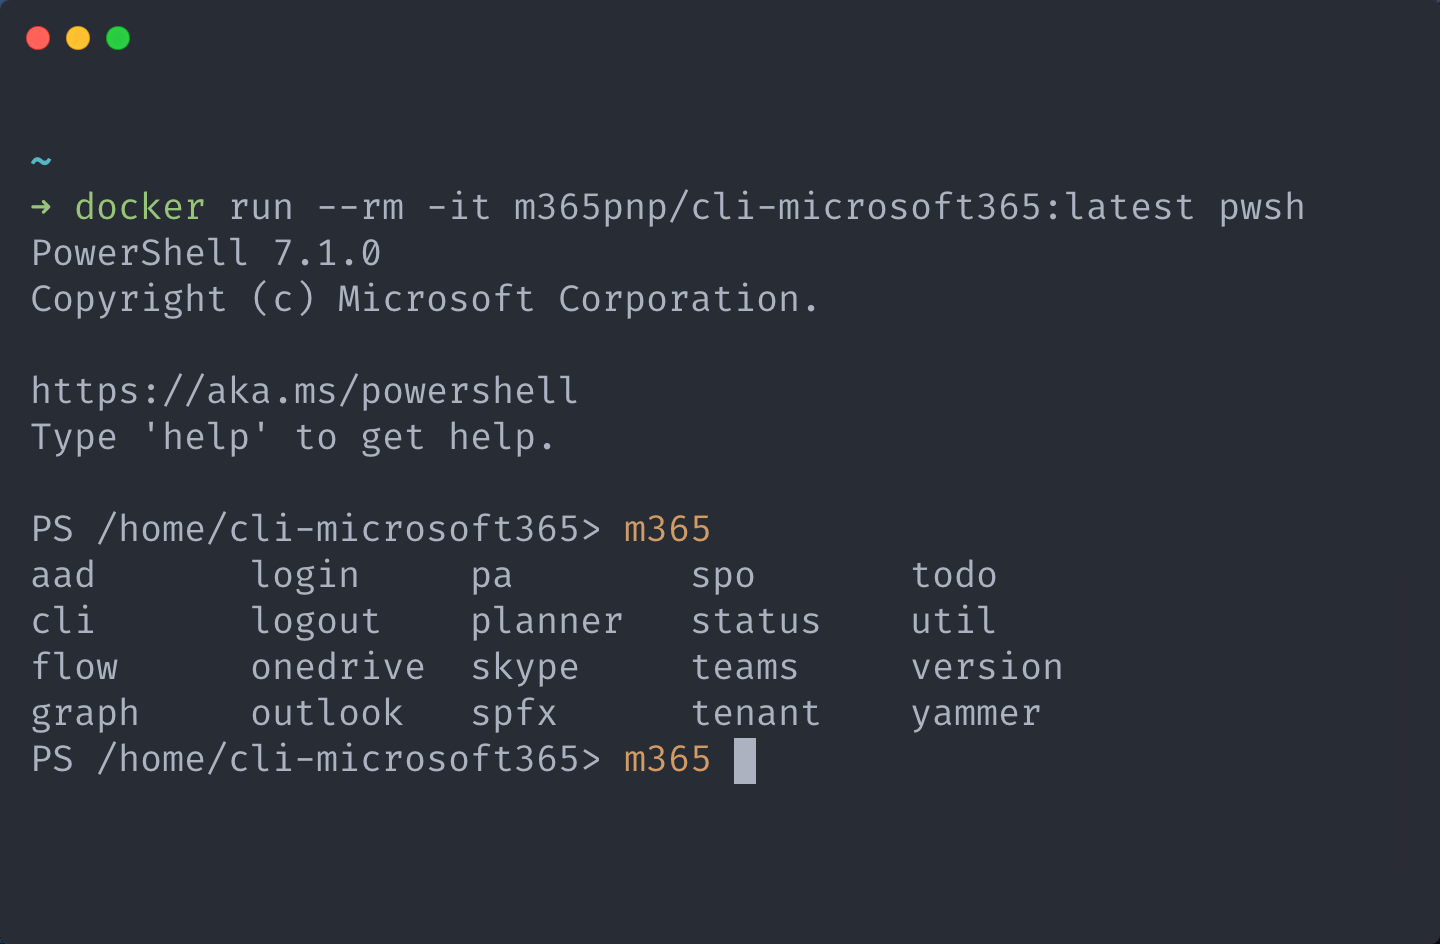 Terminal displaying a PowerShell interactive terminal session inside a docker container using m365pnp/cli-microsoft365:latest image, the prompt is displaying command completion options for m365 command